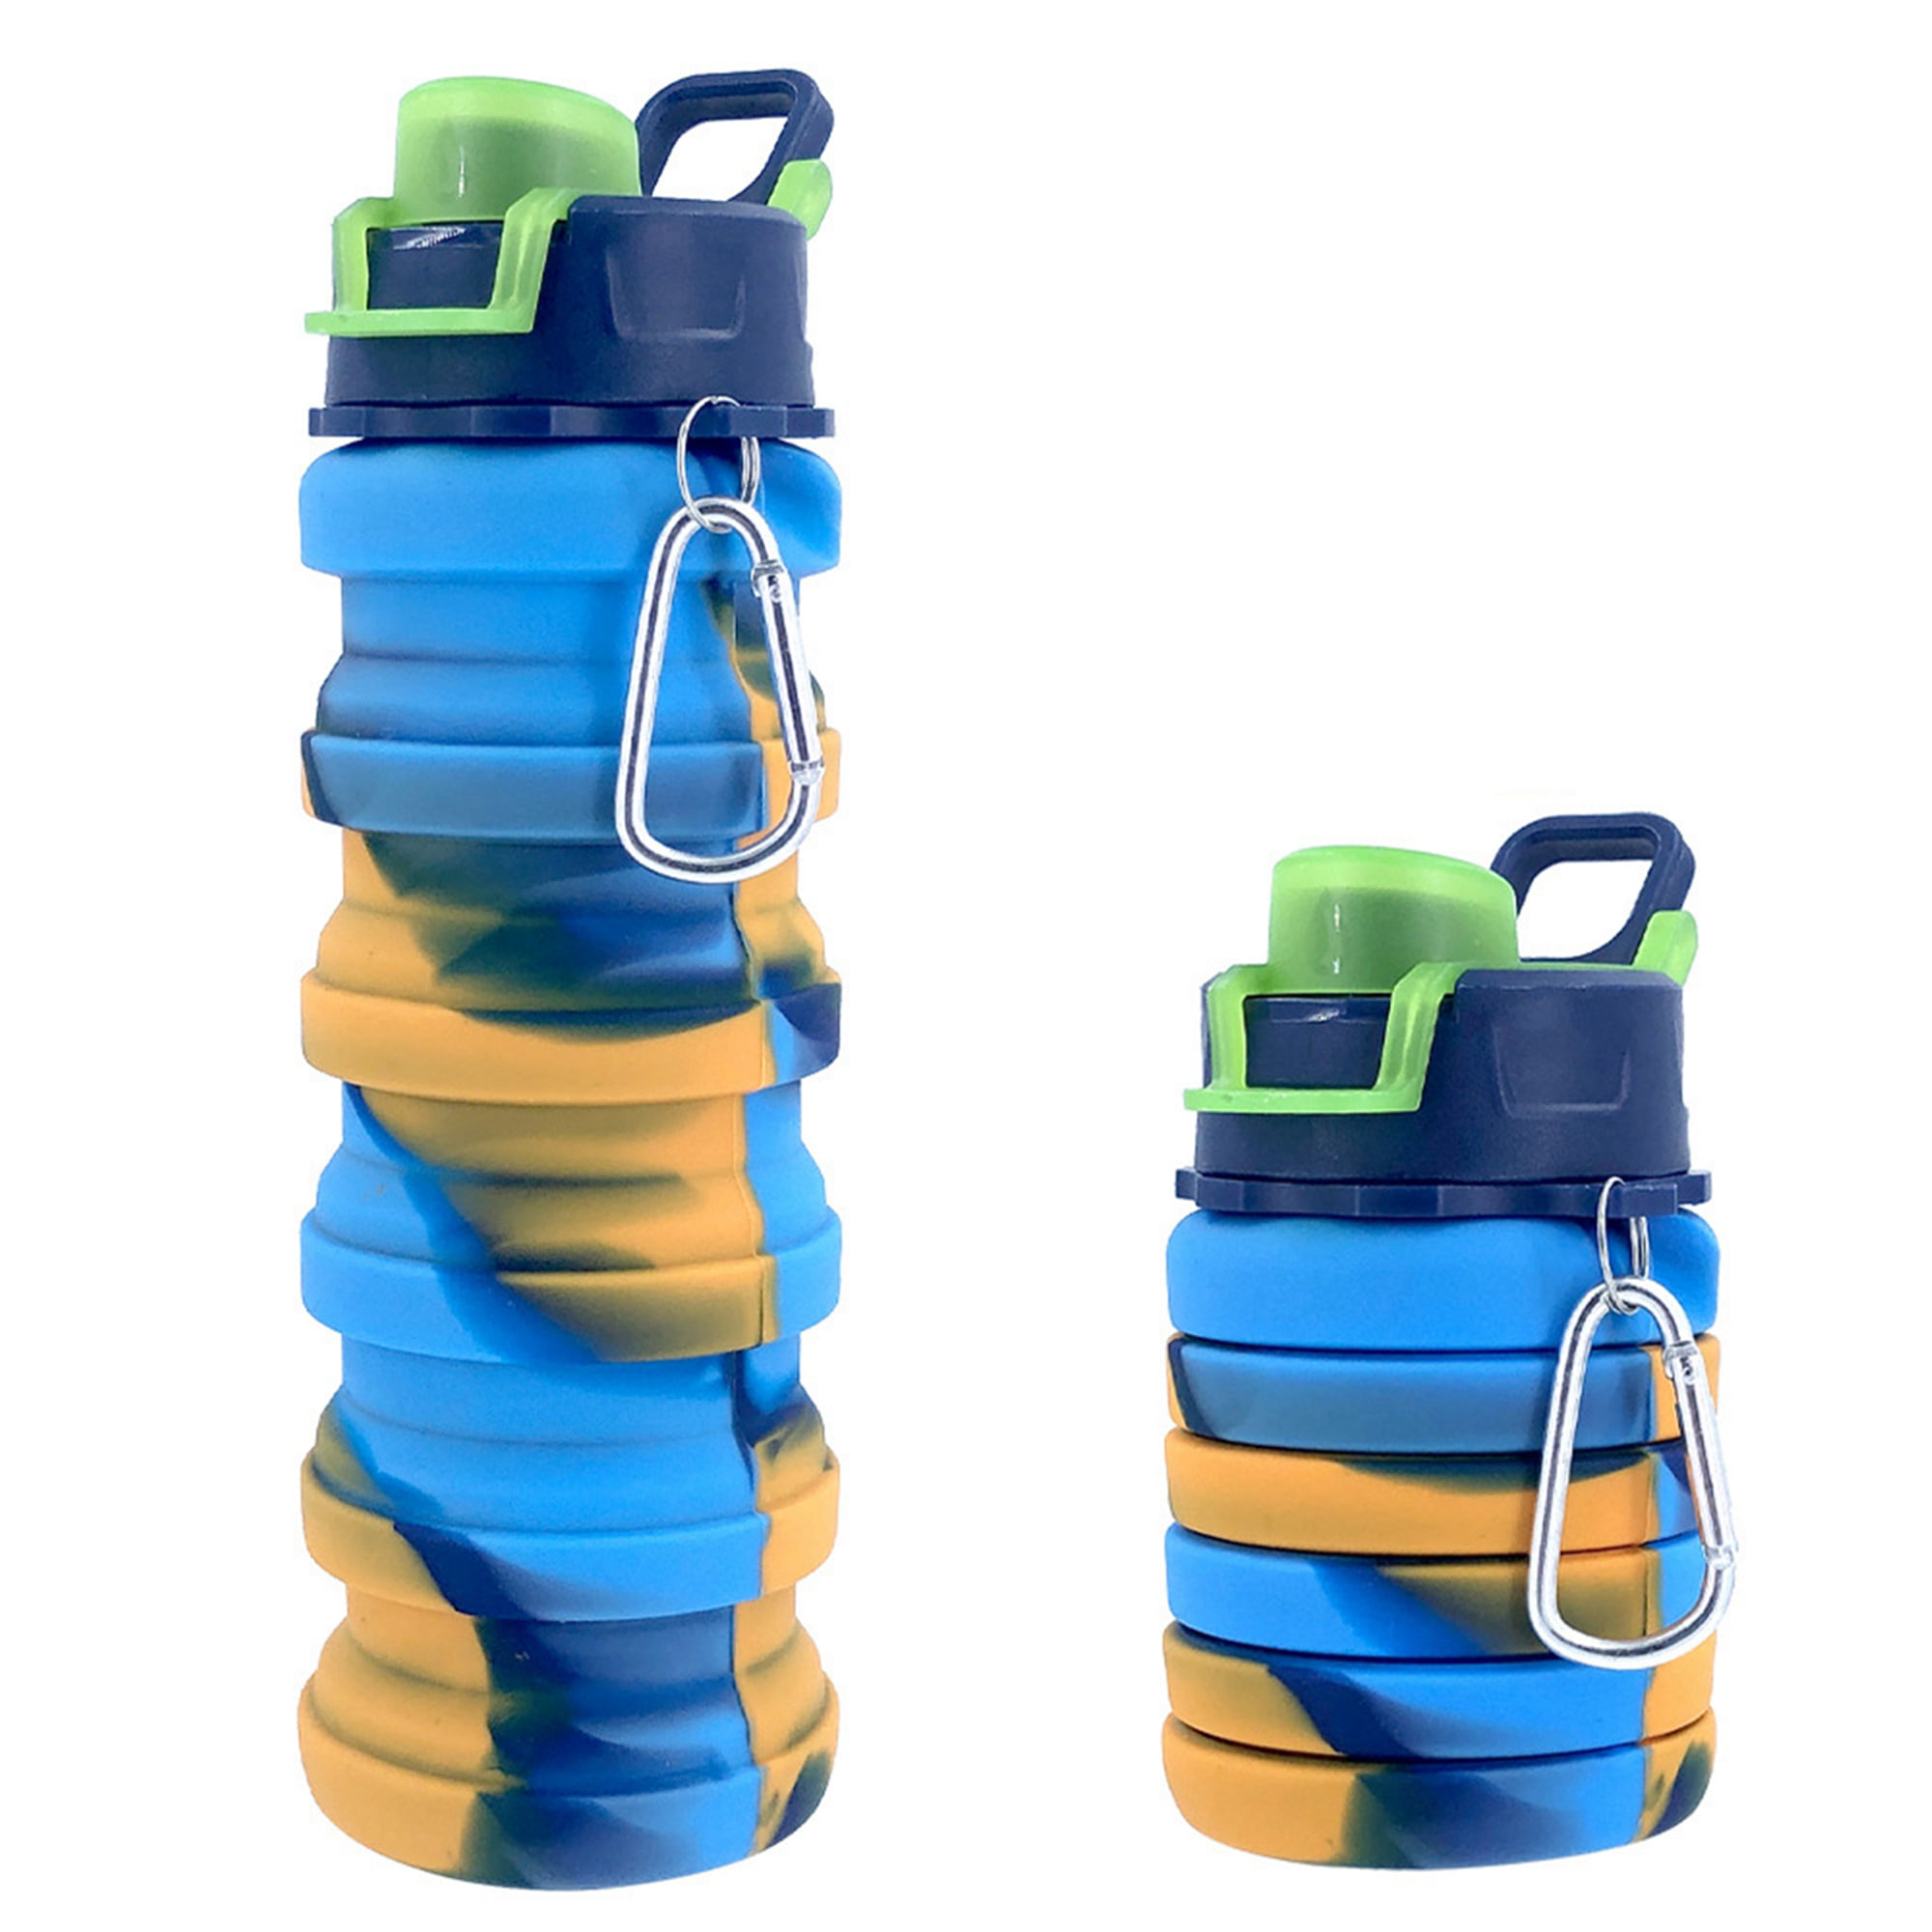 Qisiwole Collapsible Water Bottles 16oz/500ml, Silicone Travel Water Bottles with Leak Proof for Sport Camping Hiking Outdoor Reusable Foldable